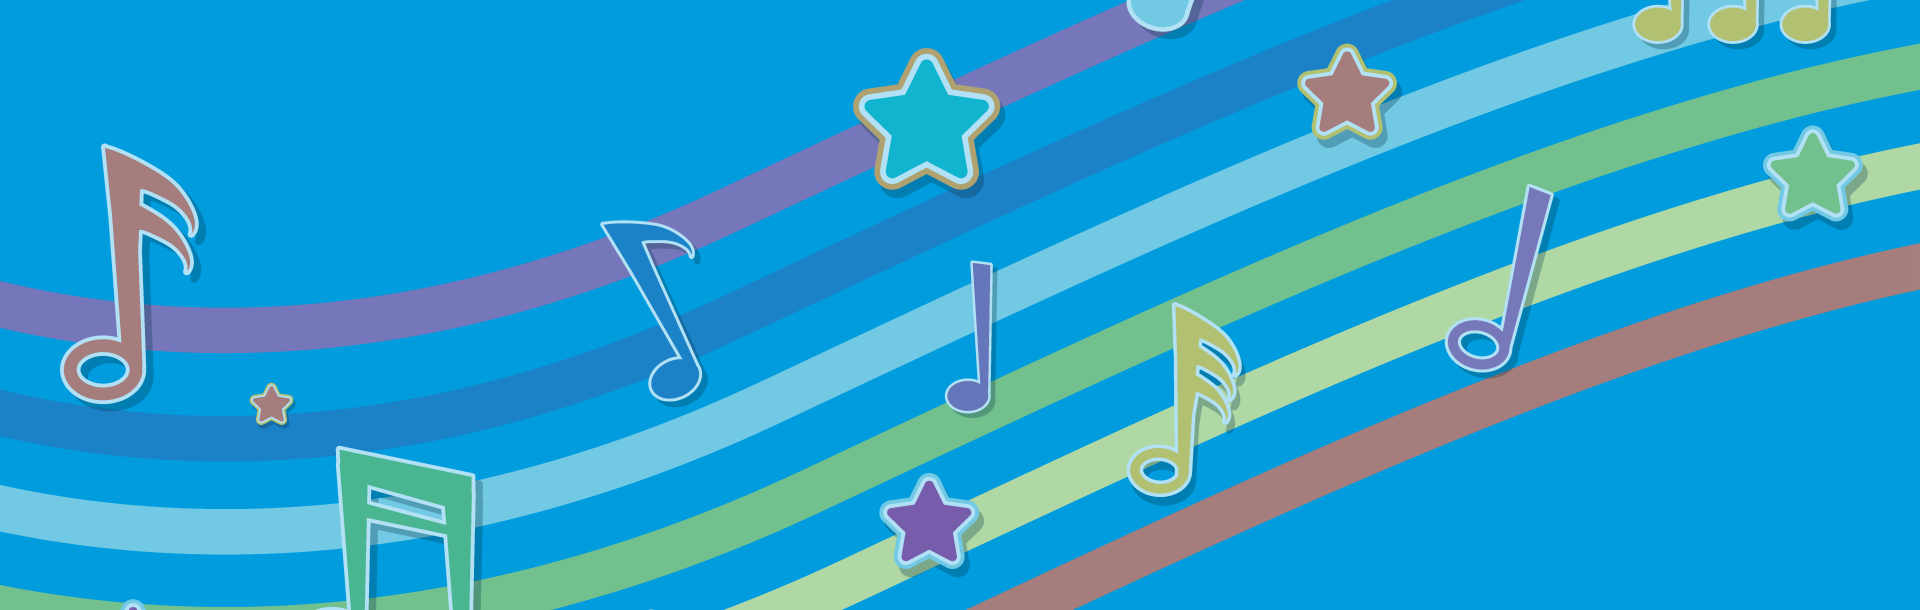 Blue background with rainbow staff and music notes with stars